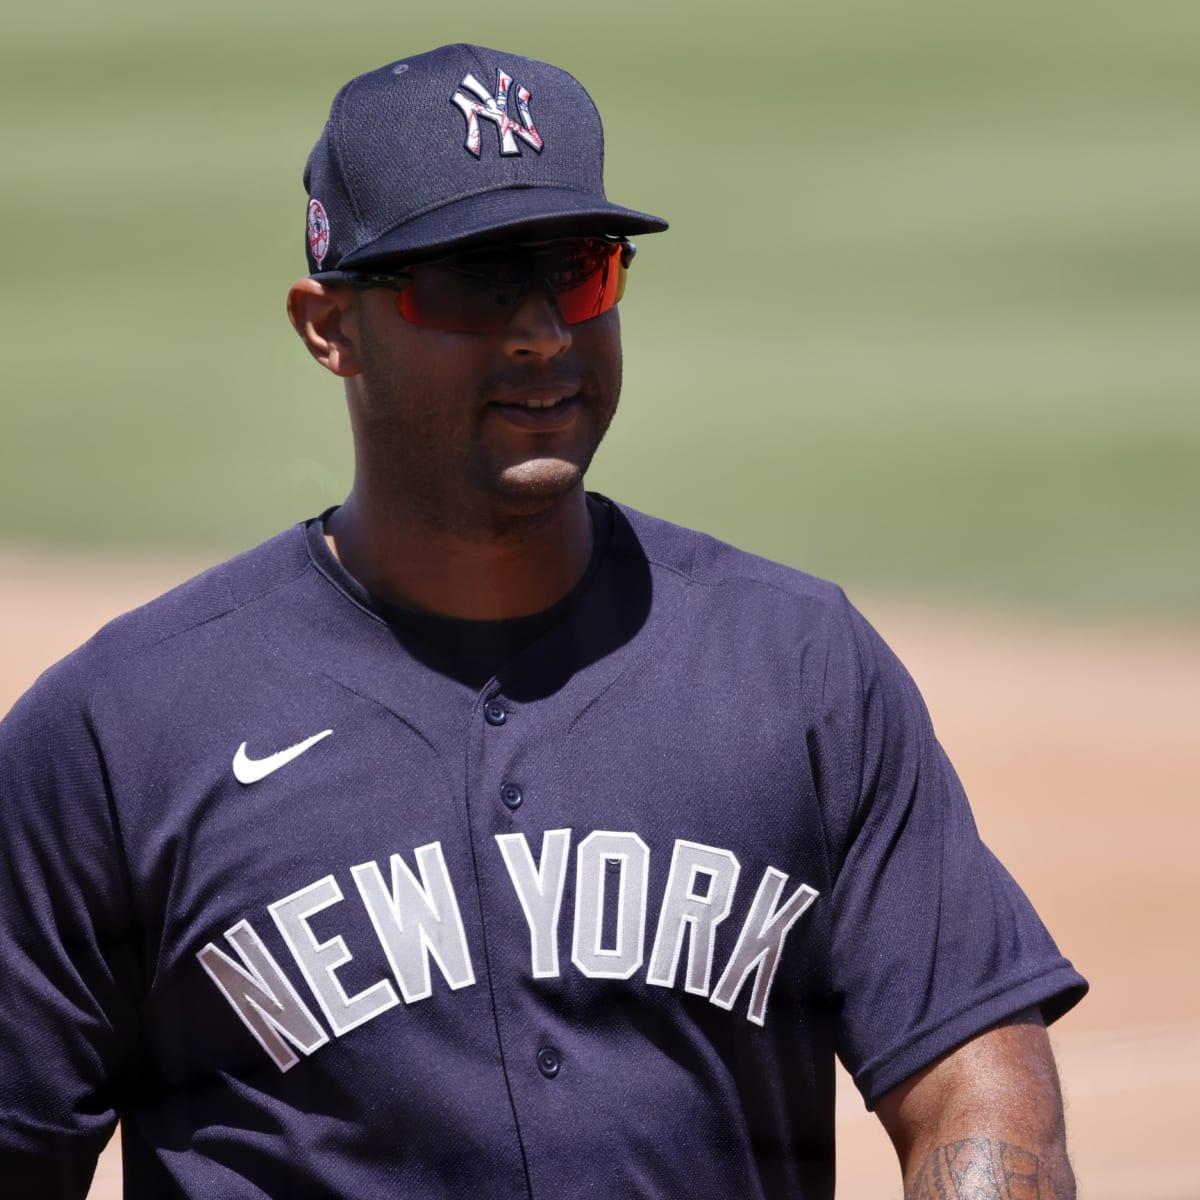 It's official: Aaron Hicks is now a former Yankee and a free agent